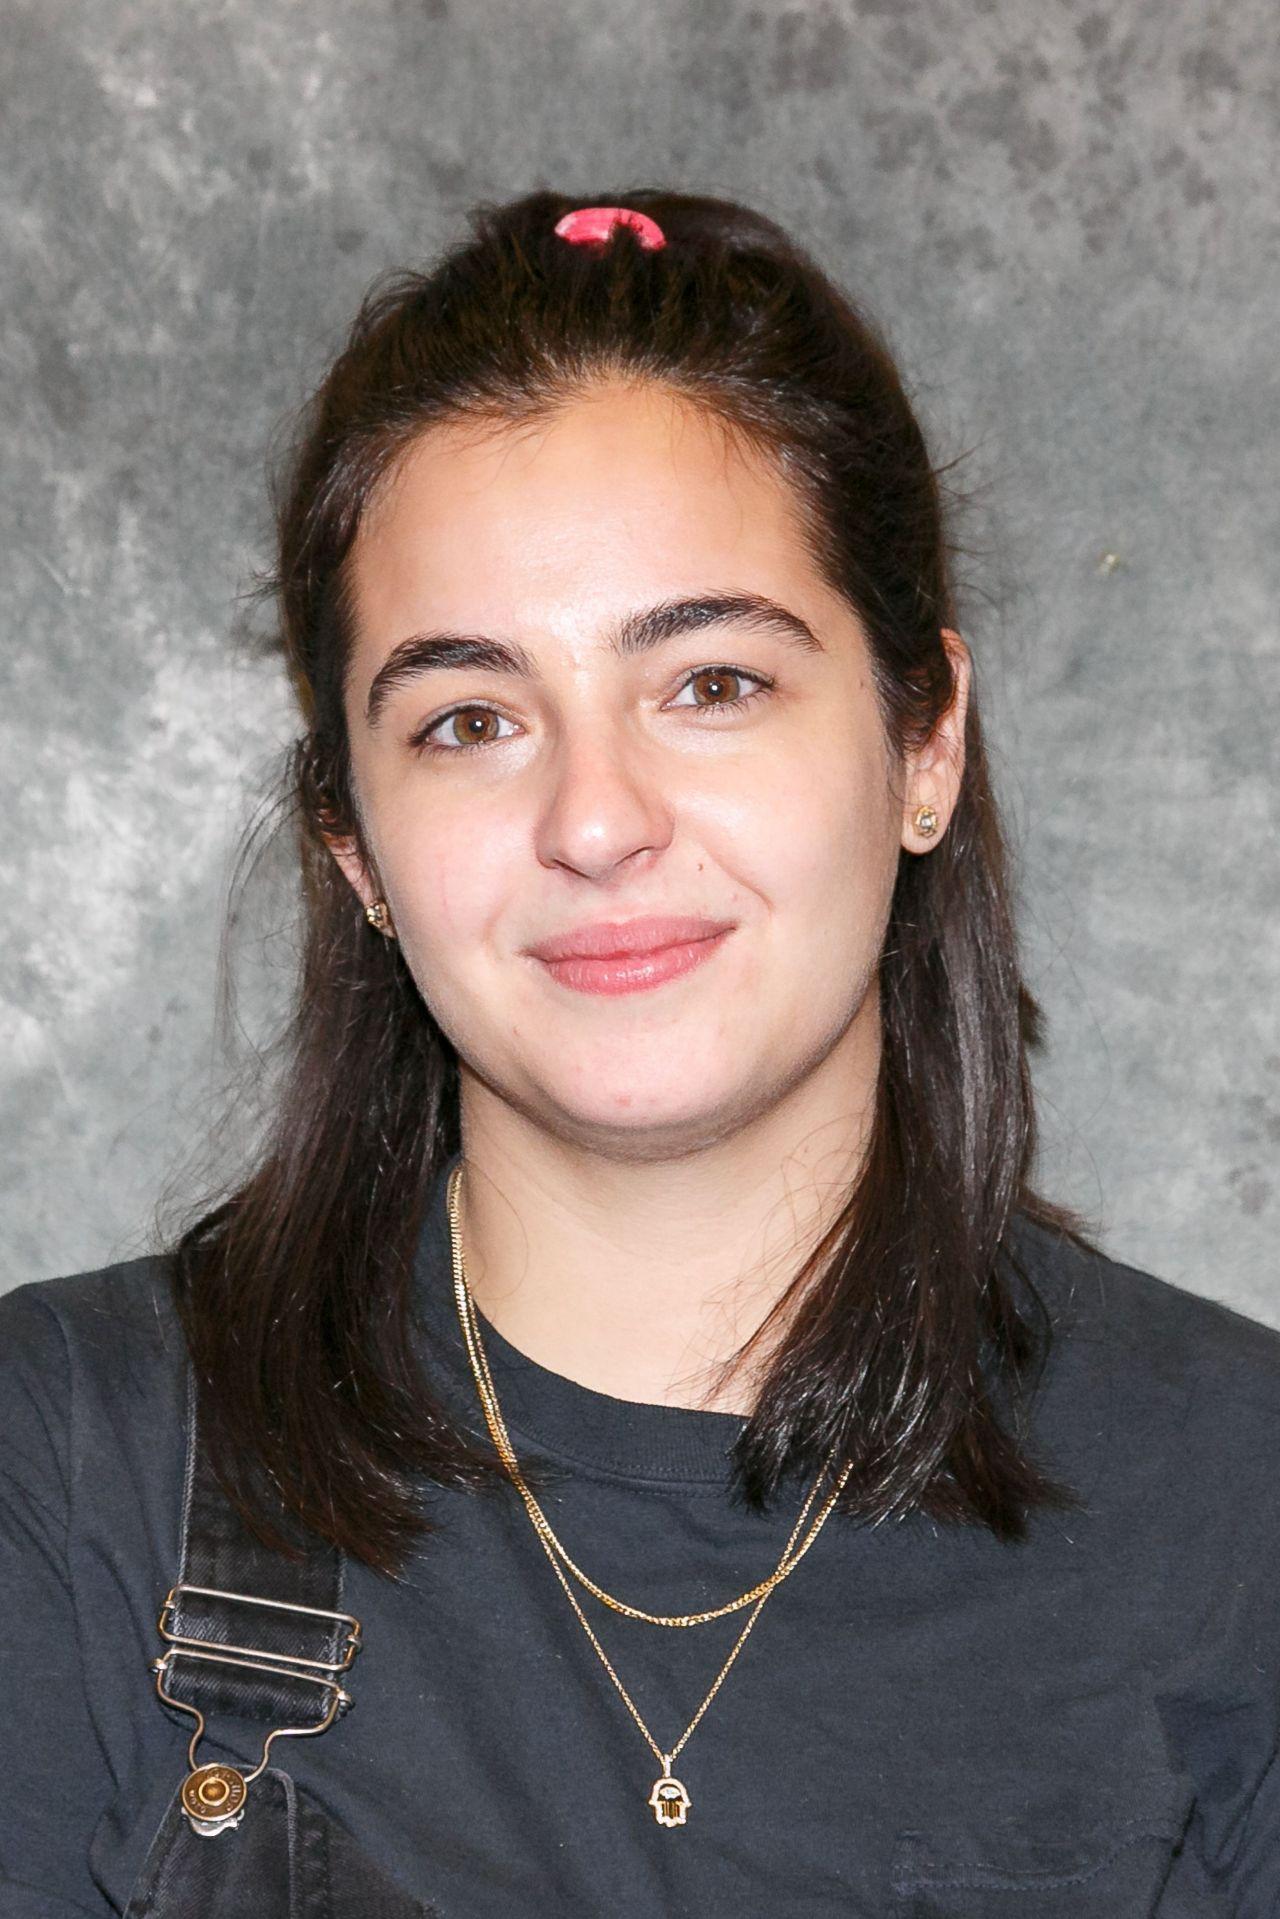 70+ Hot Pictures Of Alanna Masterson Which Are Here To Rock Your World 2